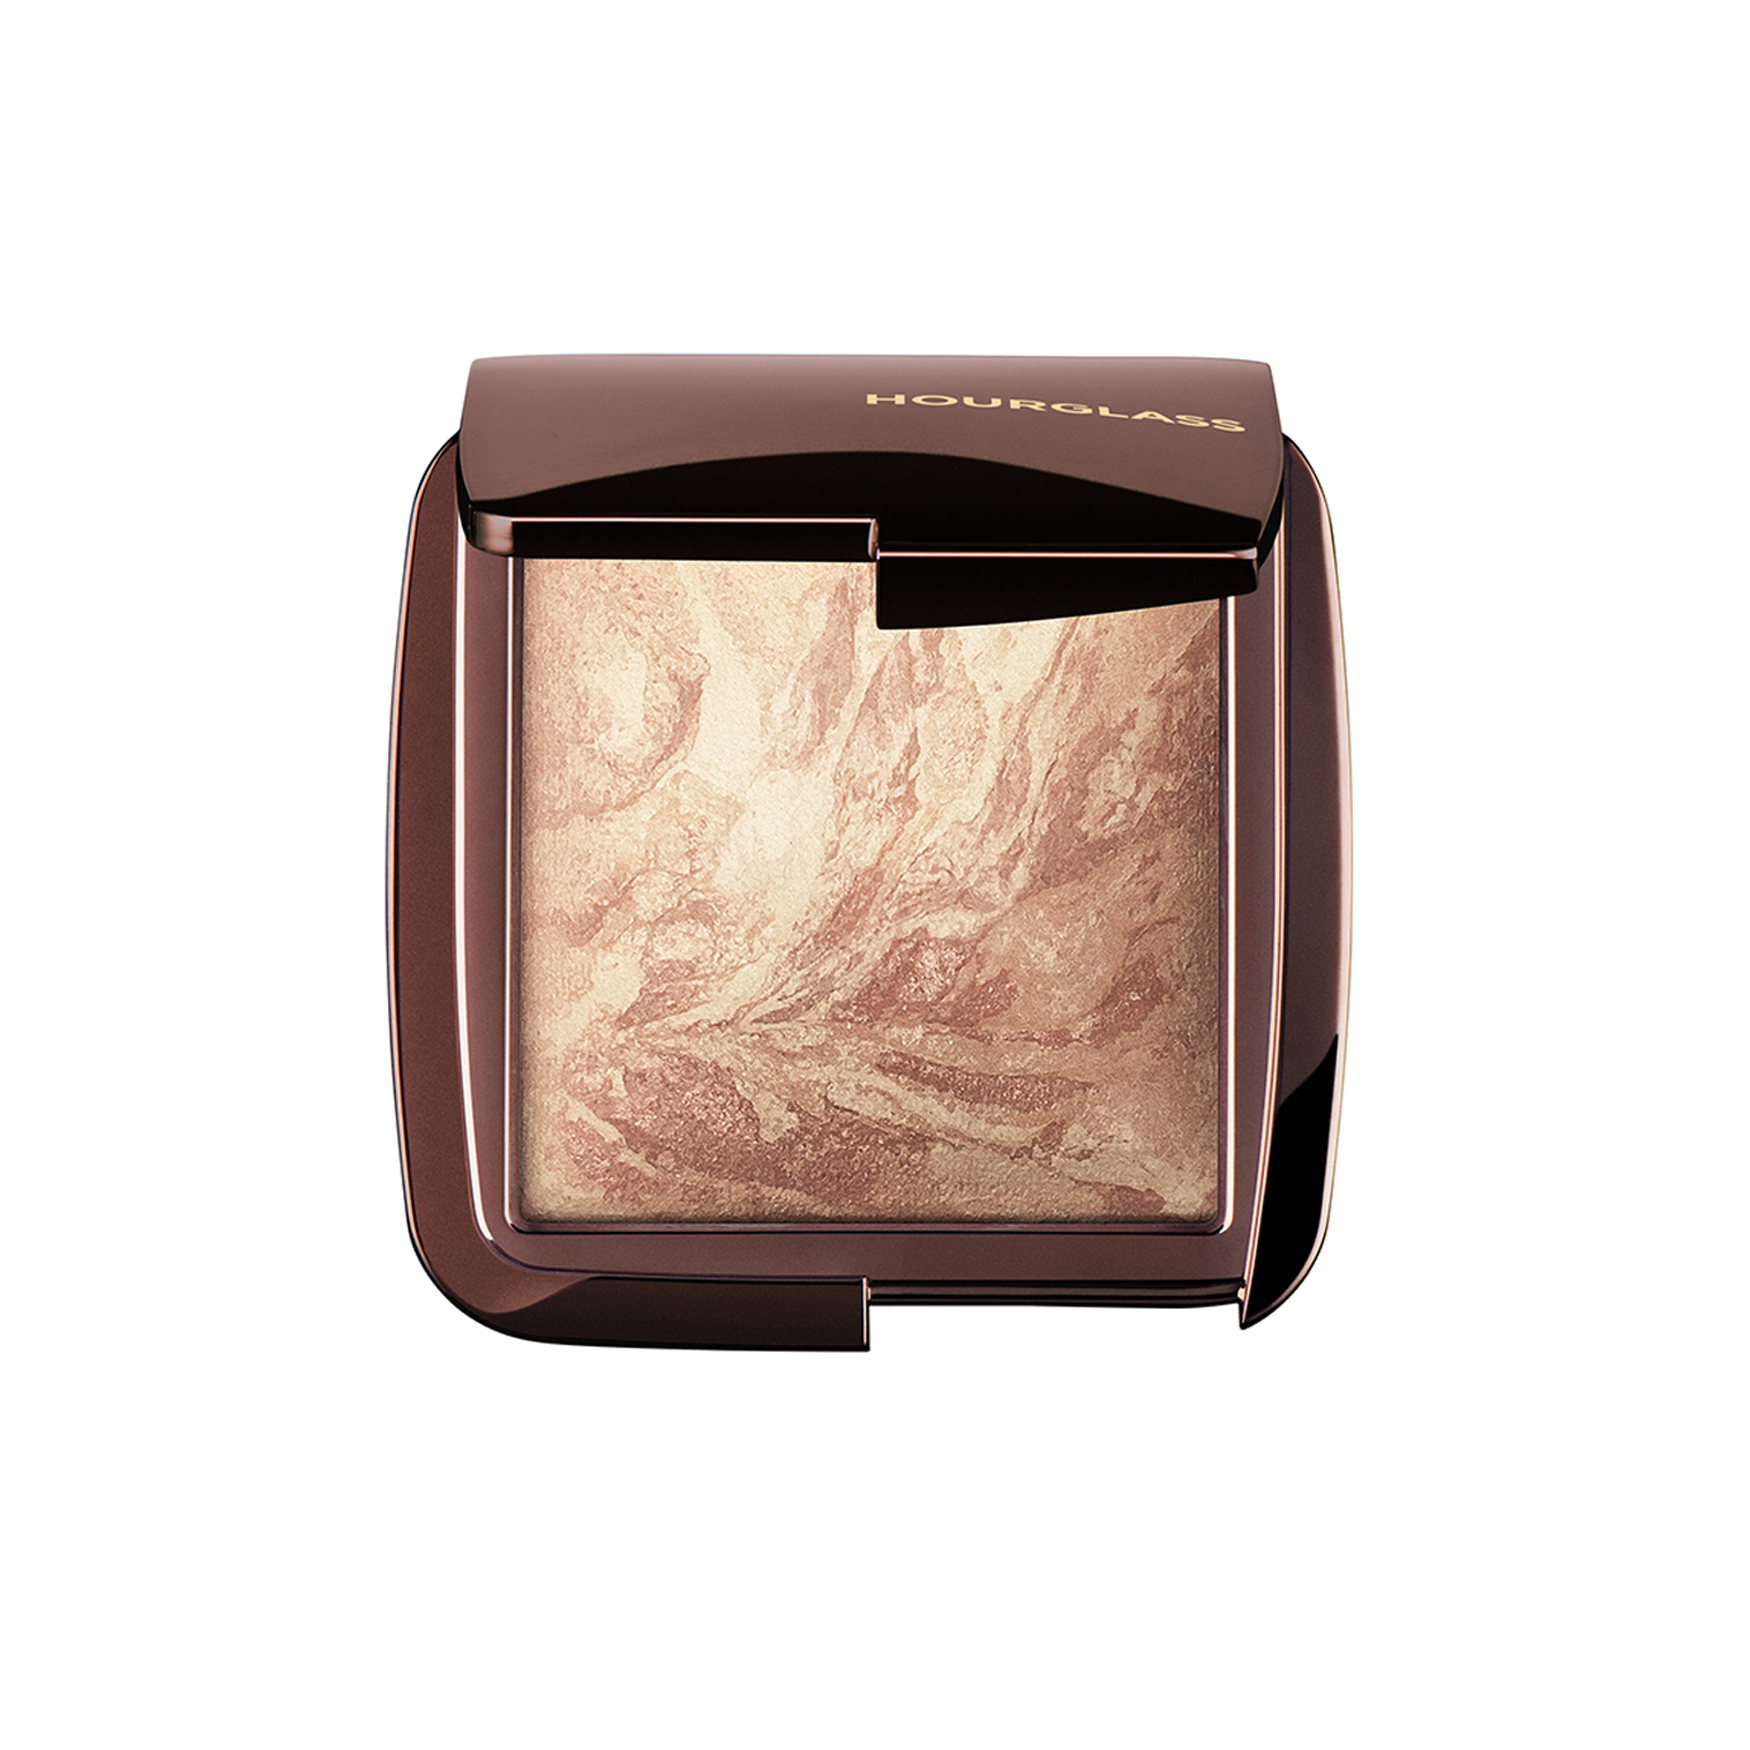 Hourglass Ambient Lighting Infinity Powder | Space NK